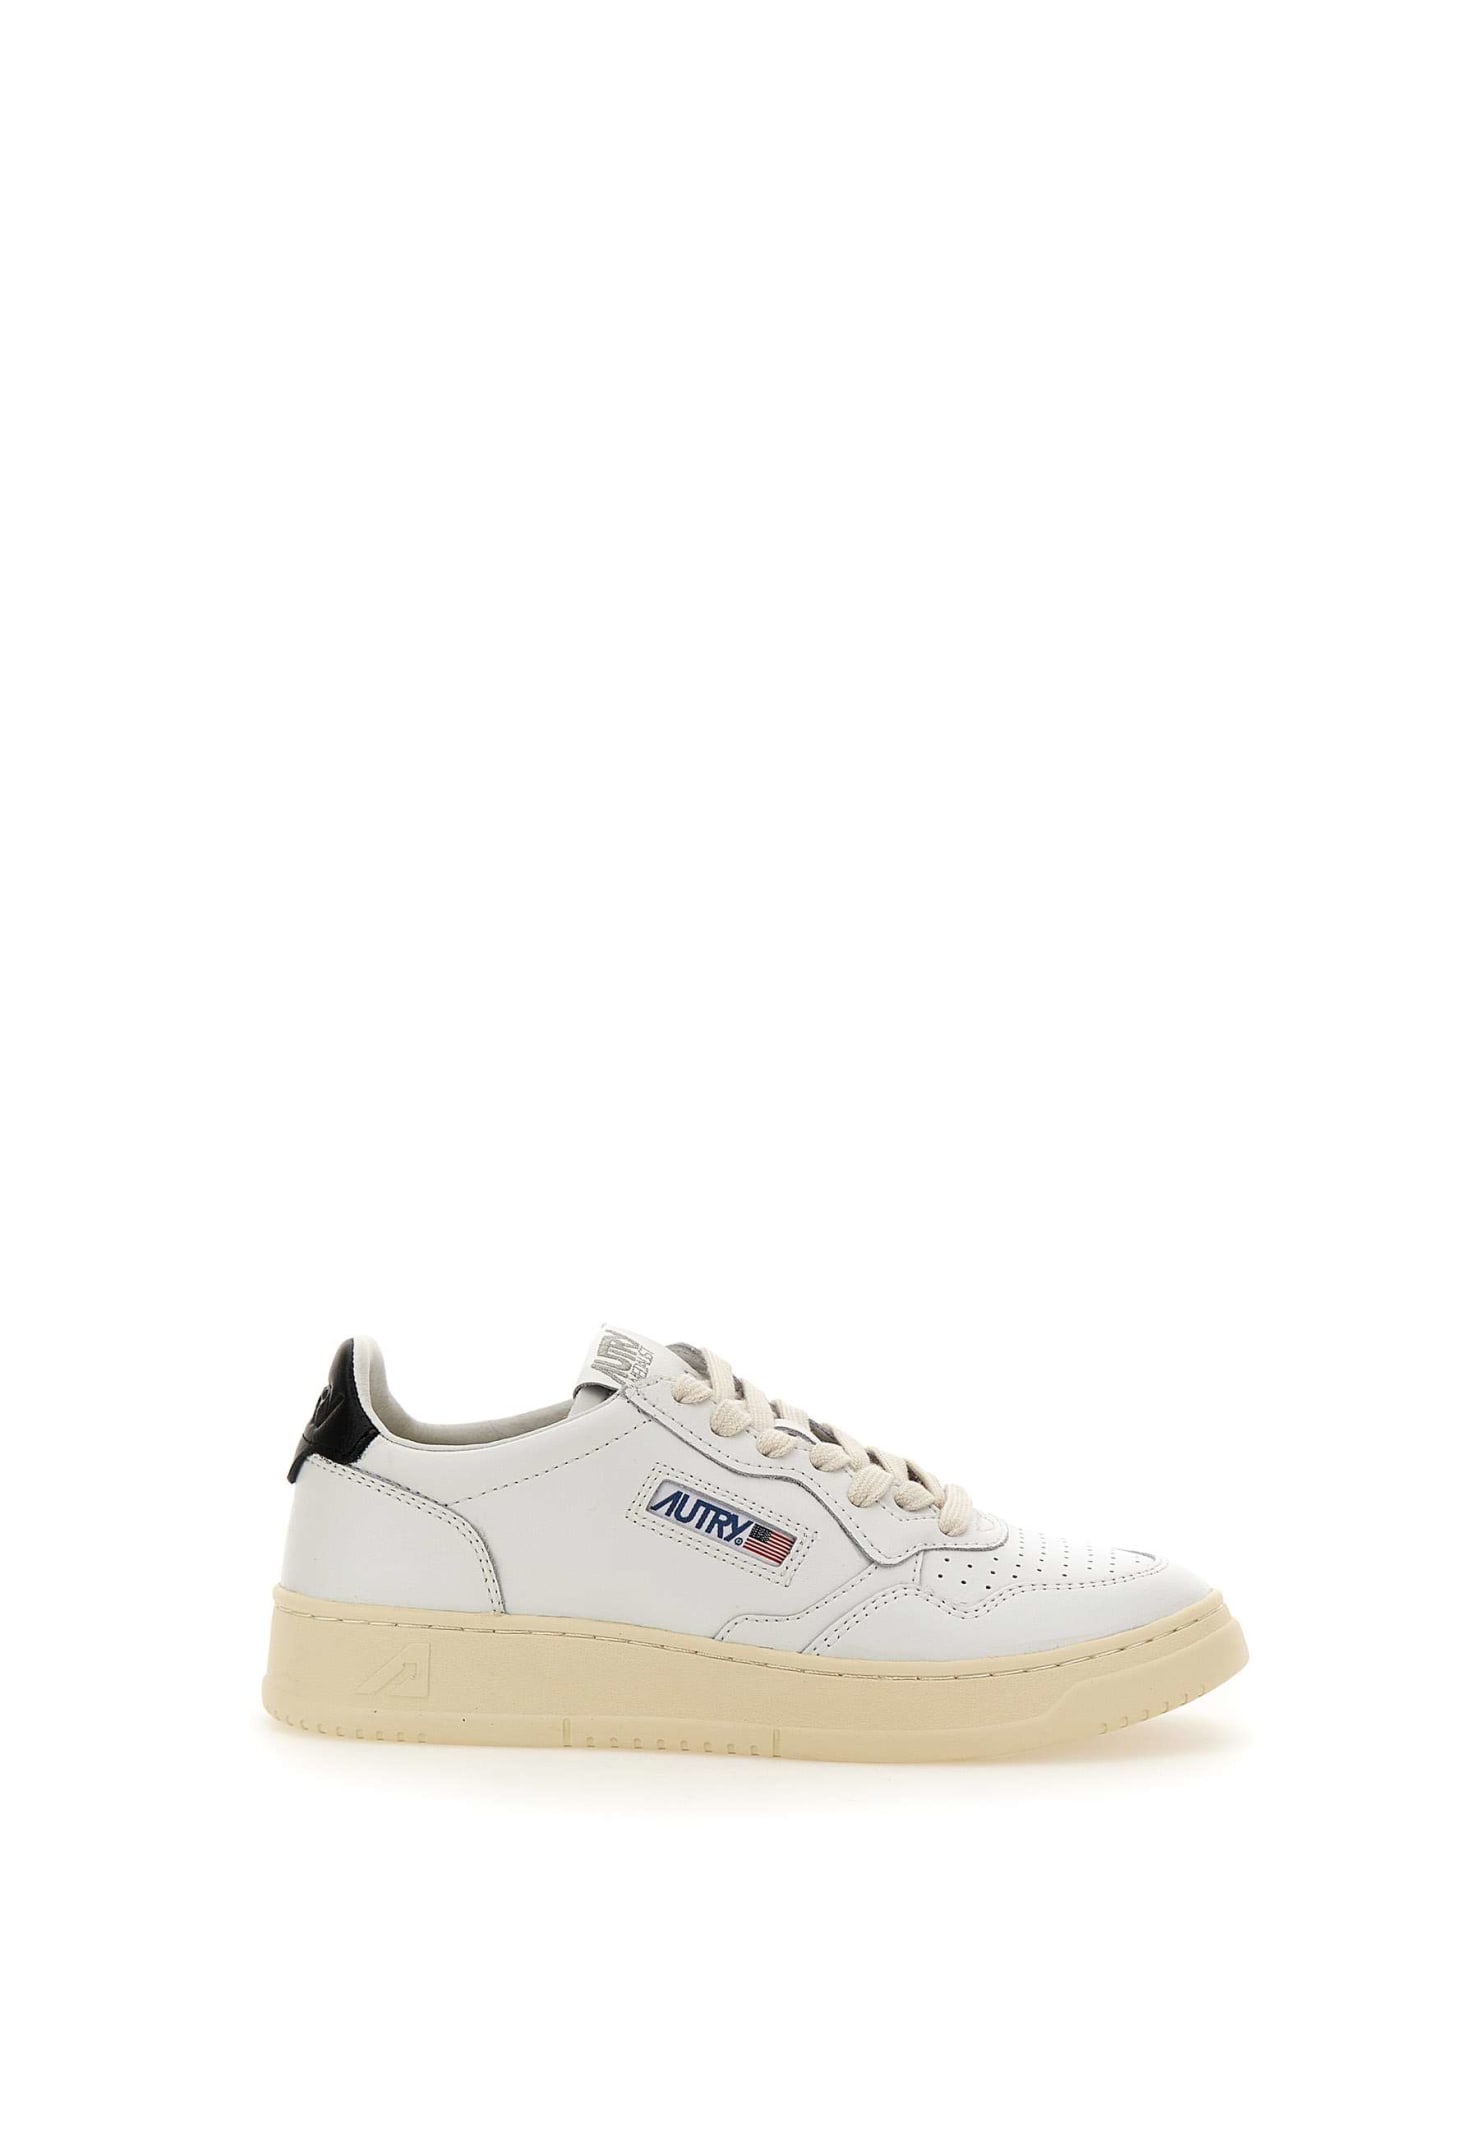 AUTRY AULW LL22 LEATHER SNEAKERS